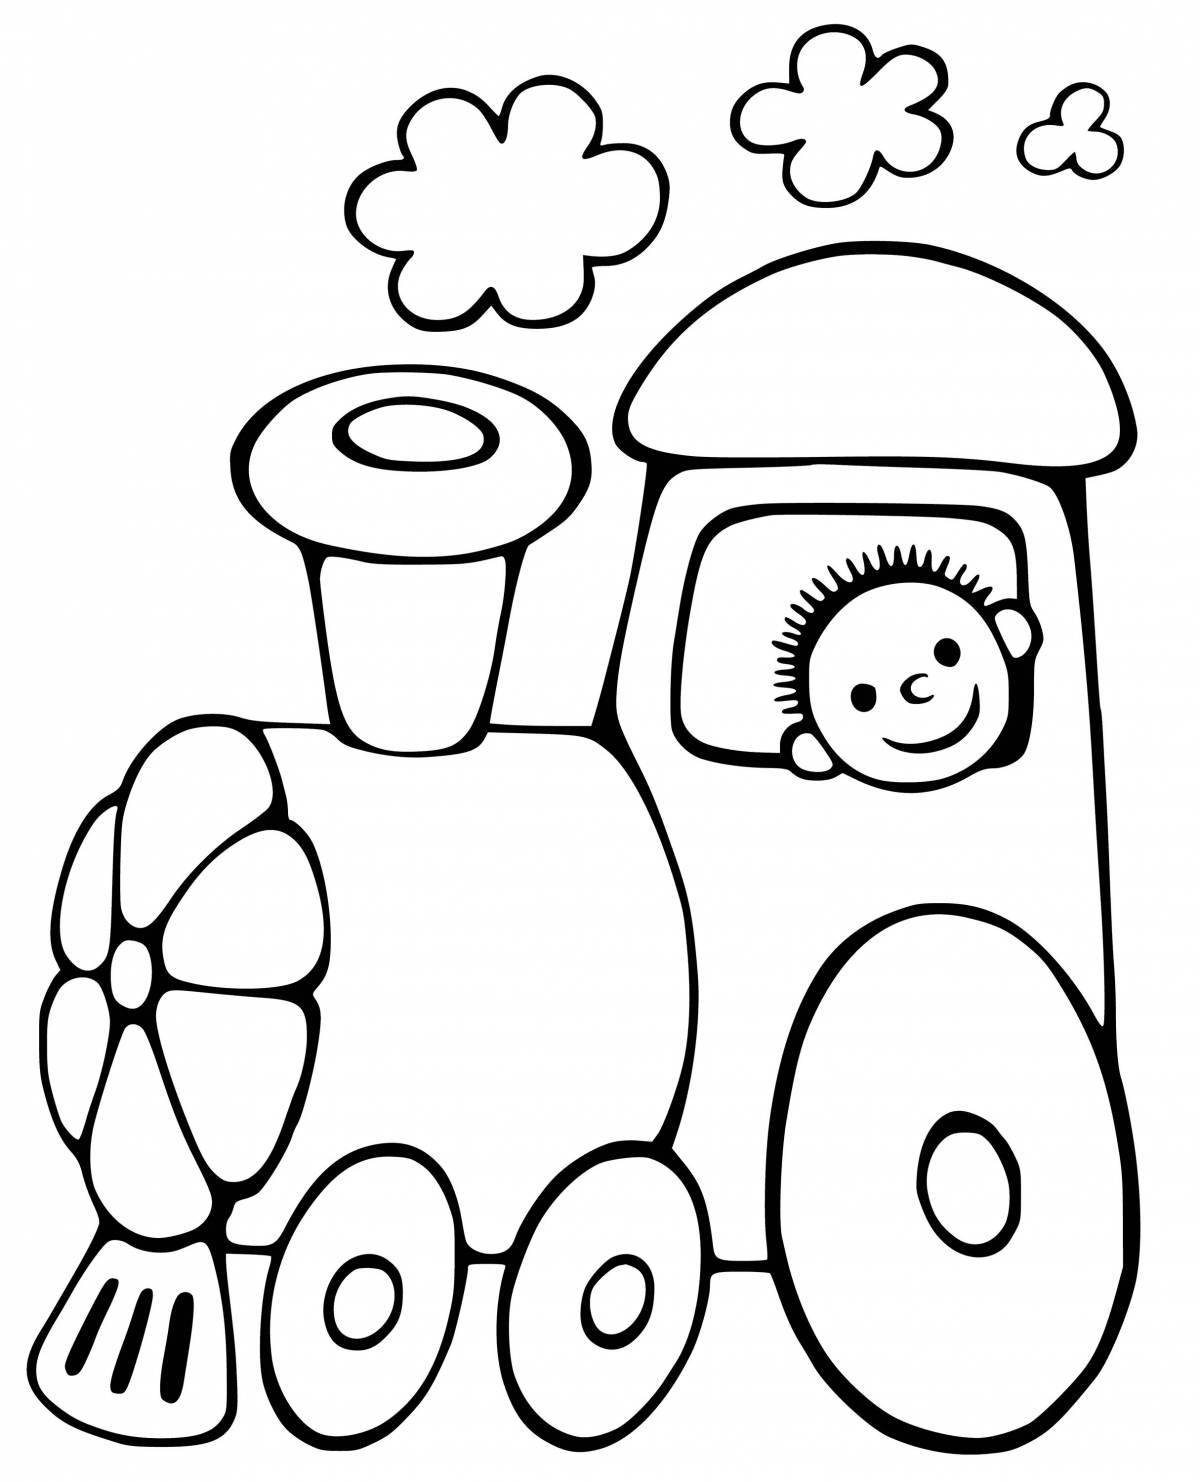 Adorable train coloring page for kids